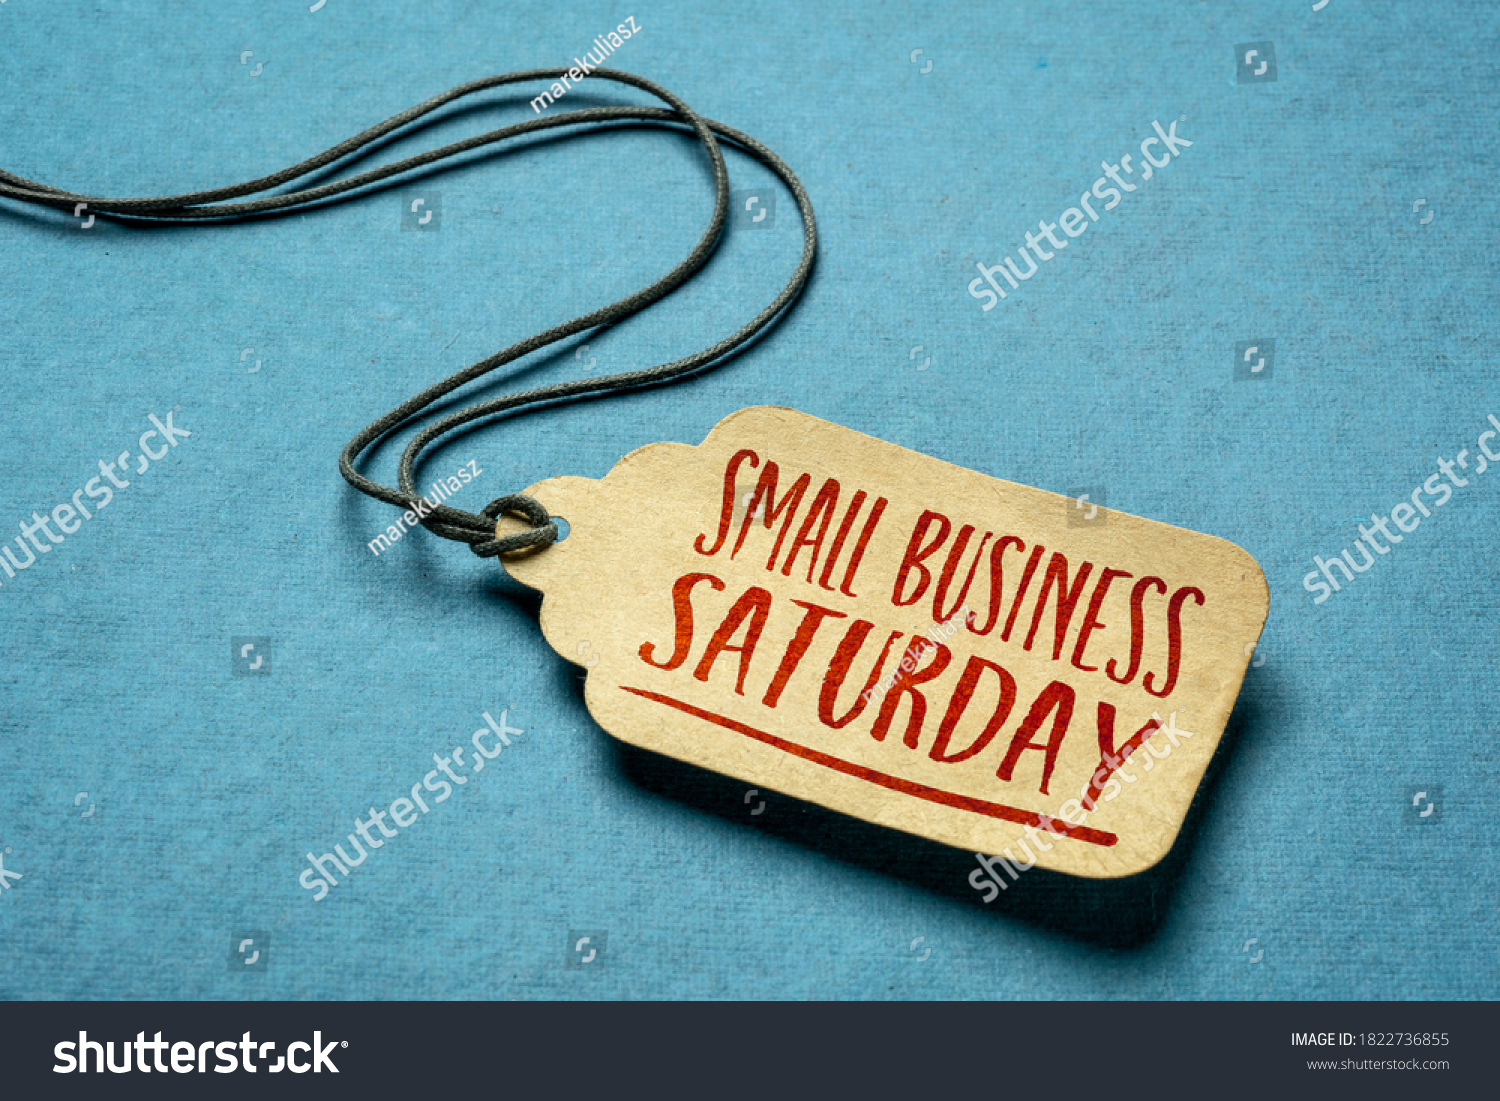 Small Business Saturday sign - a paper price tag with a twine against blue paper background, local holiday shopping concept #1822736855